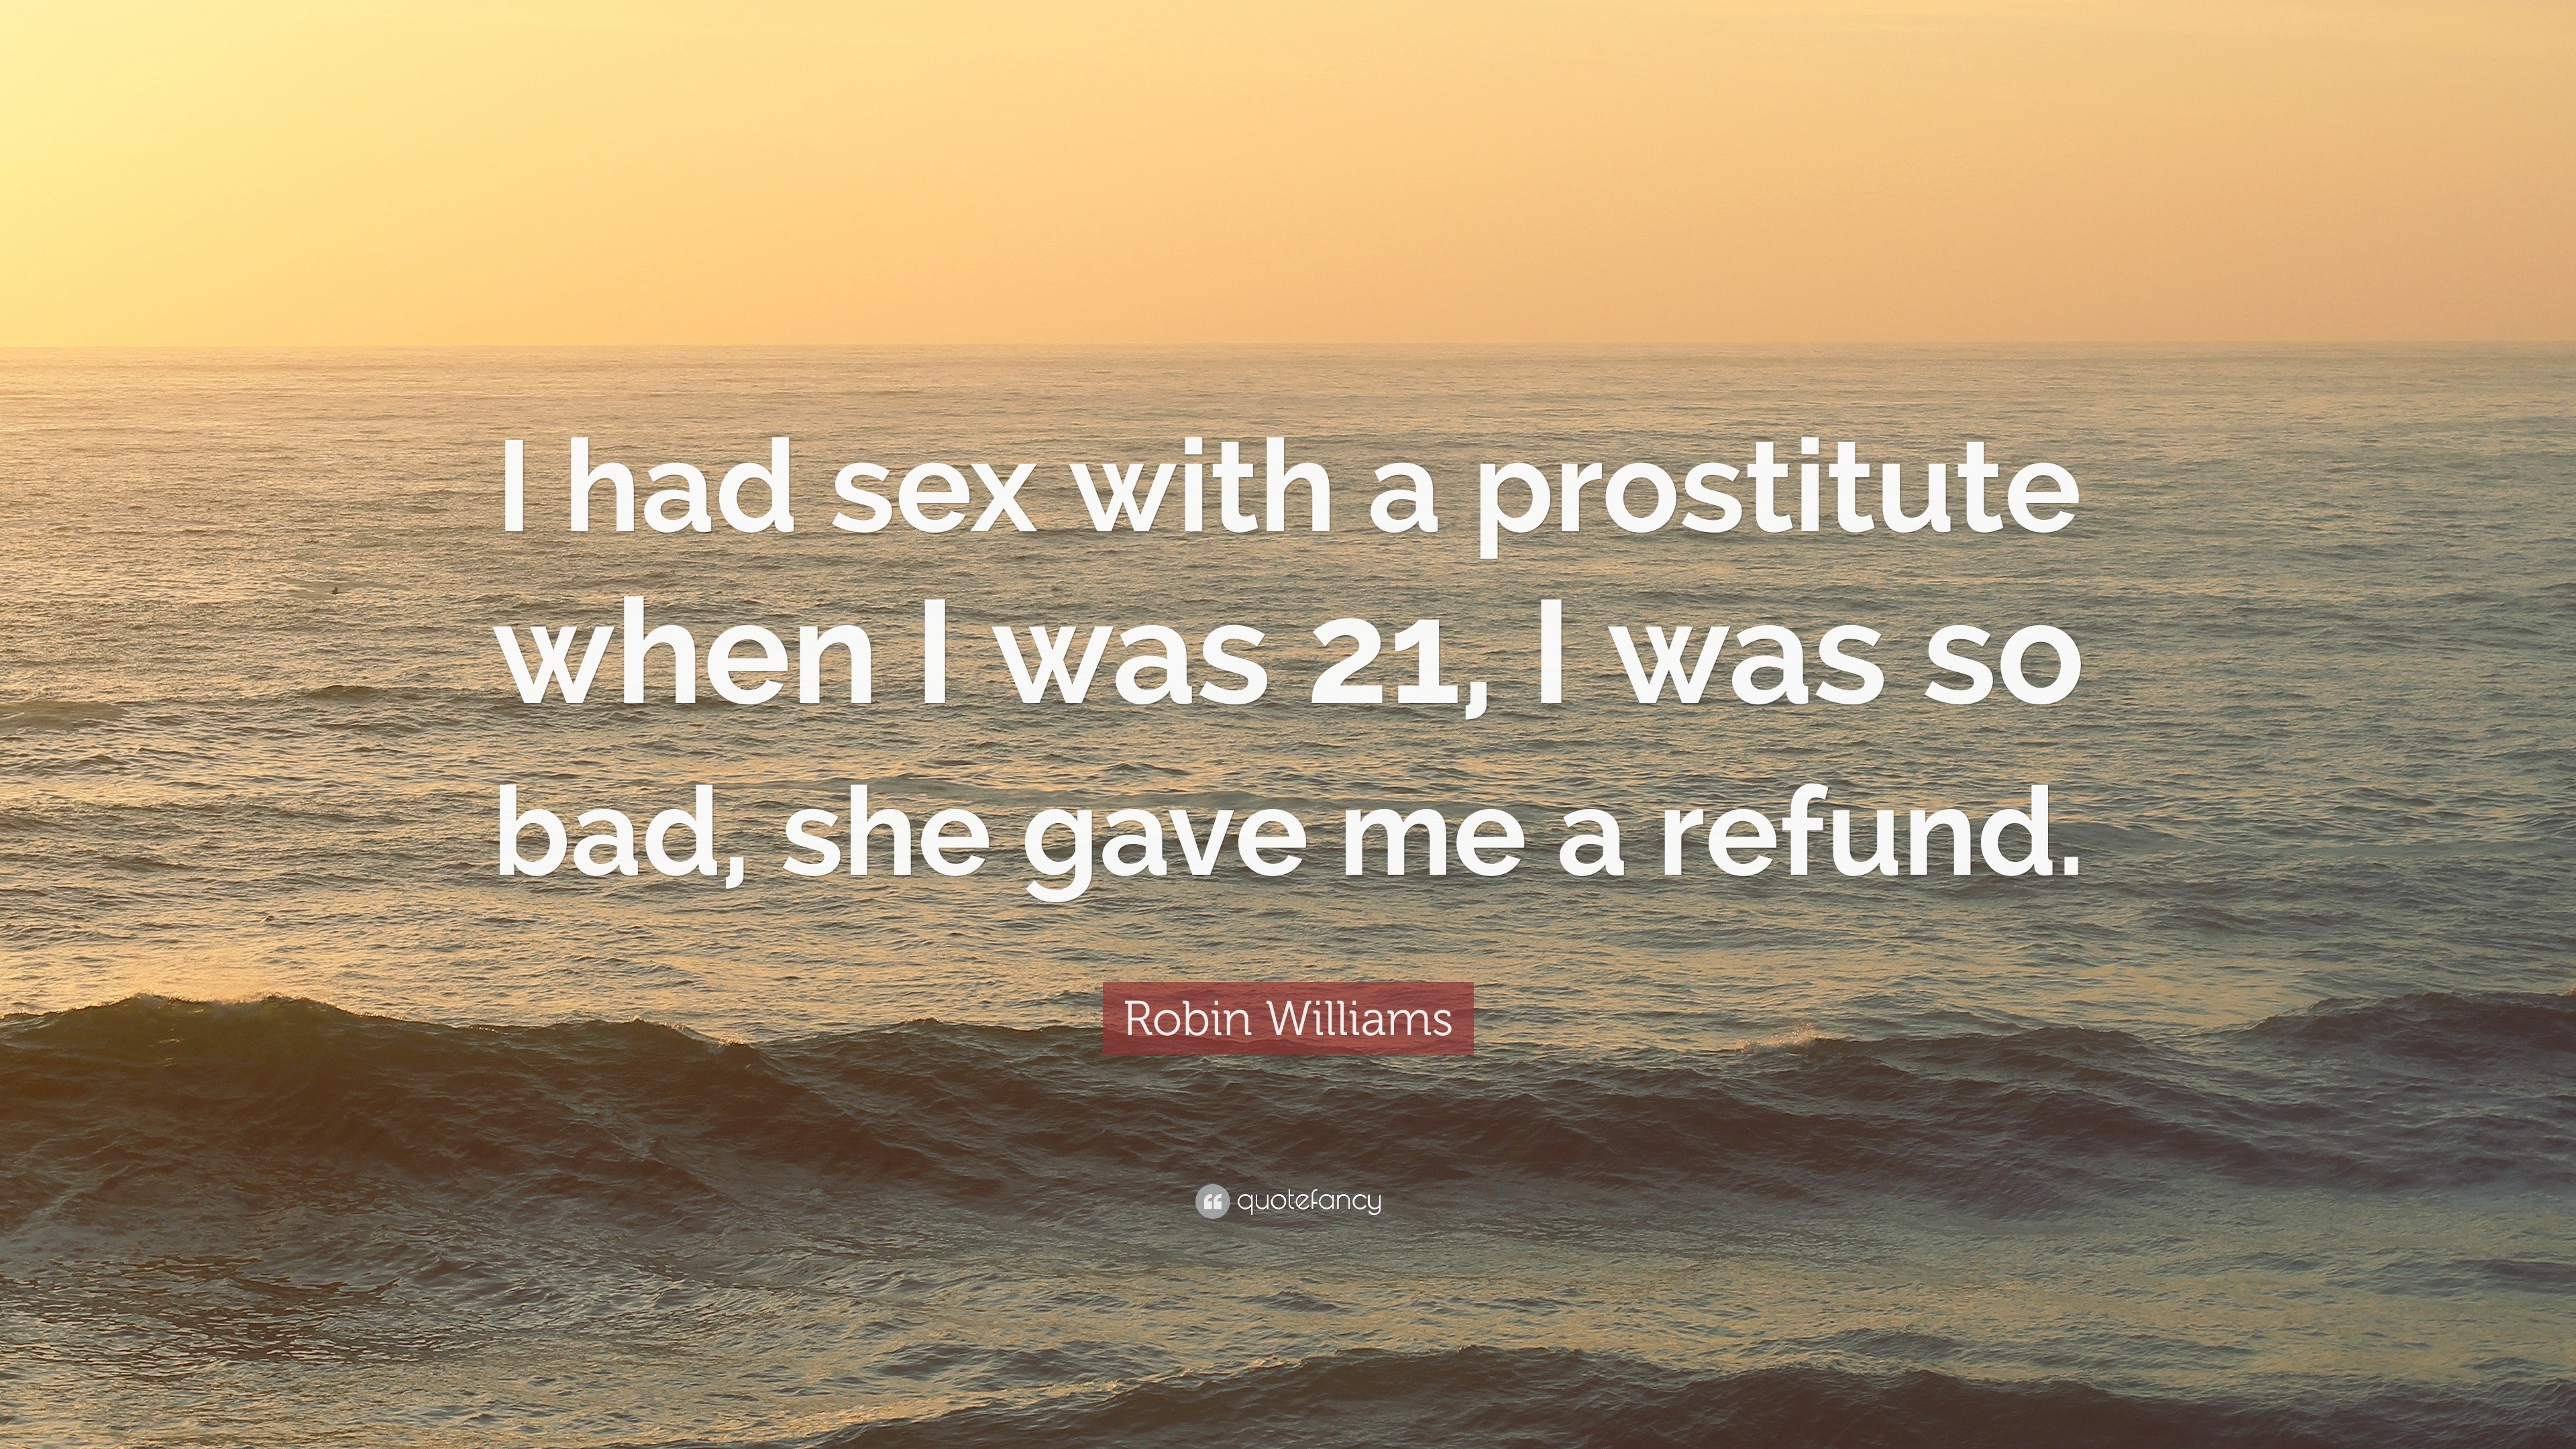 Robin Williams Quote “I had sex with a prostitute when I was 21, I was so